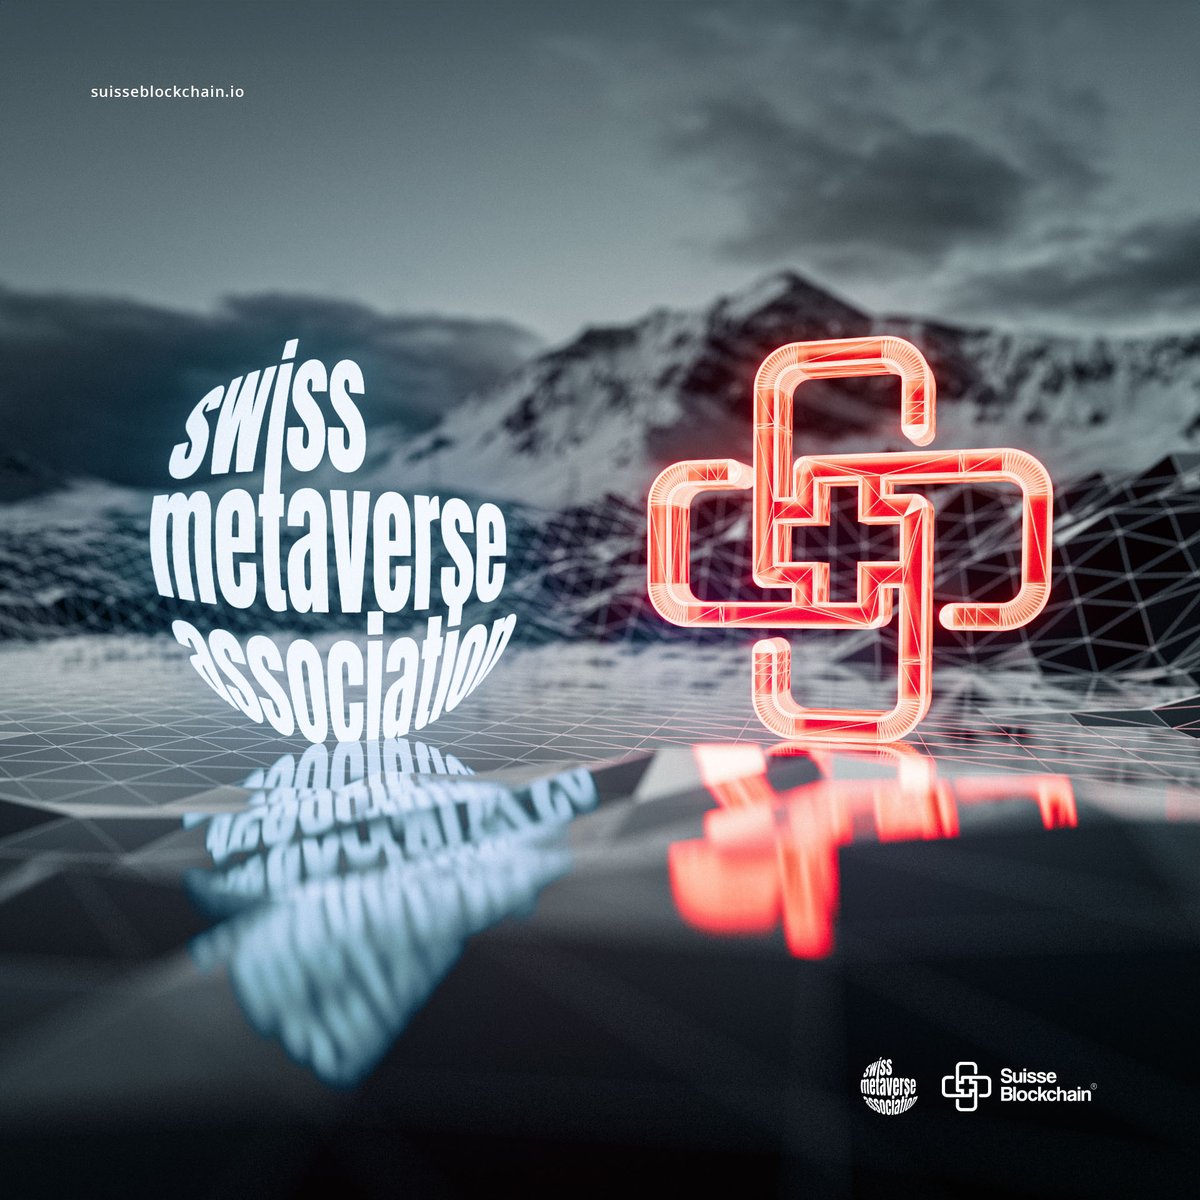 🎉 We're excited to announce that Suisse Blockchain is now a member of the @SwissMetaverse. 

This move aligns with our commitment to advancing blockchain technology within the evolving Metaverse.

#SuisseBlockchain #SwissMetaverseAssociation #Blockchain #Metaverse